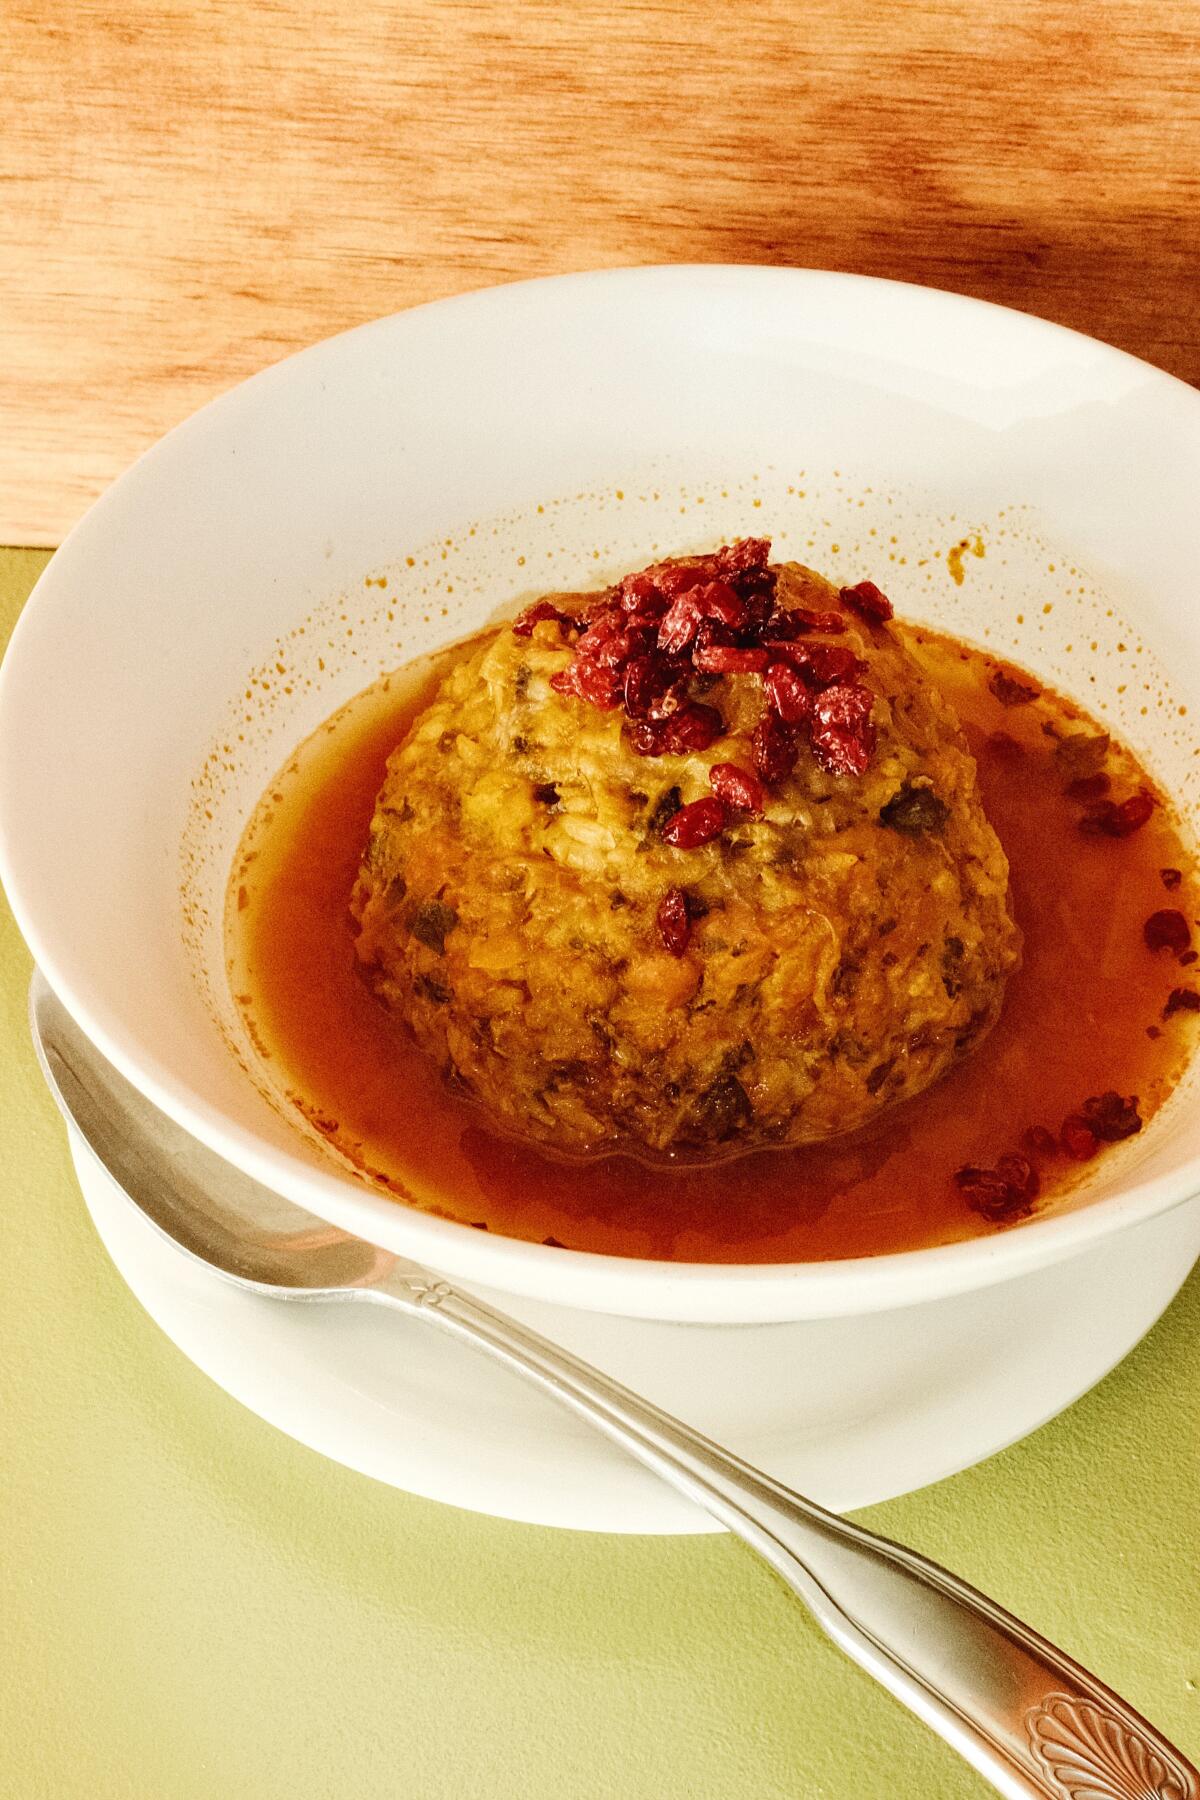 A kofteh tabrizi, or large braised meatball, in a bowl.